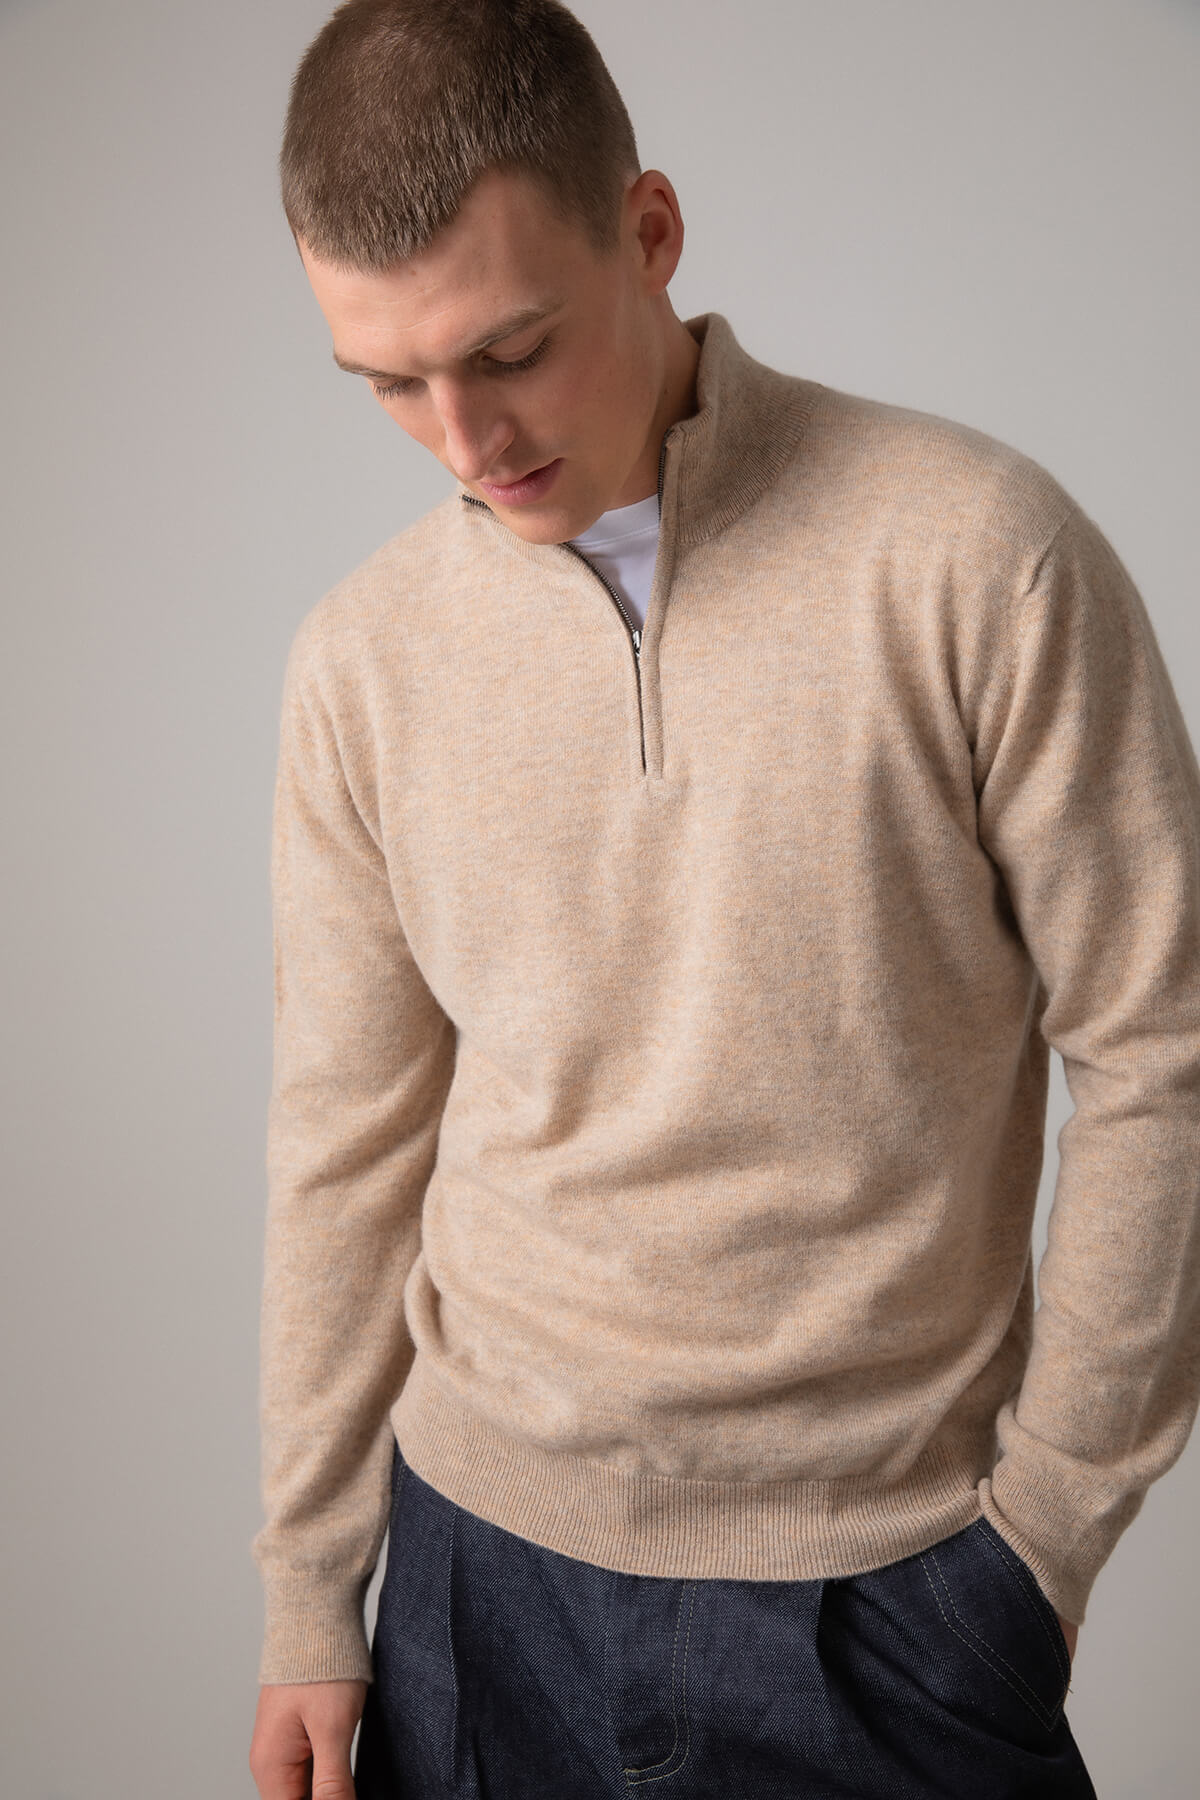 Johnstons of Elgin Men’s Cashmere Zip Neck Jumper in Oatmeal on model wearing navy trousers on grey background KAI05151HB0210